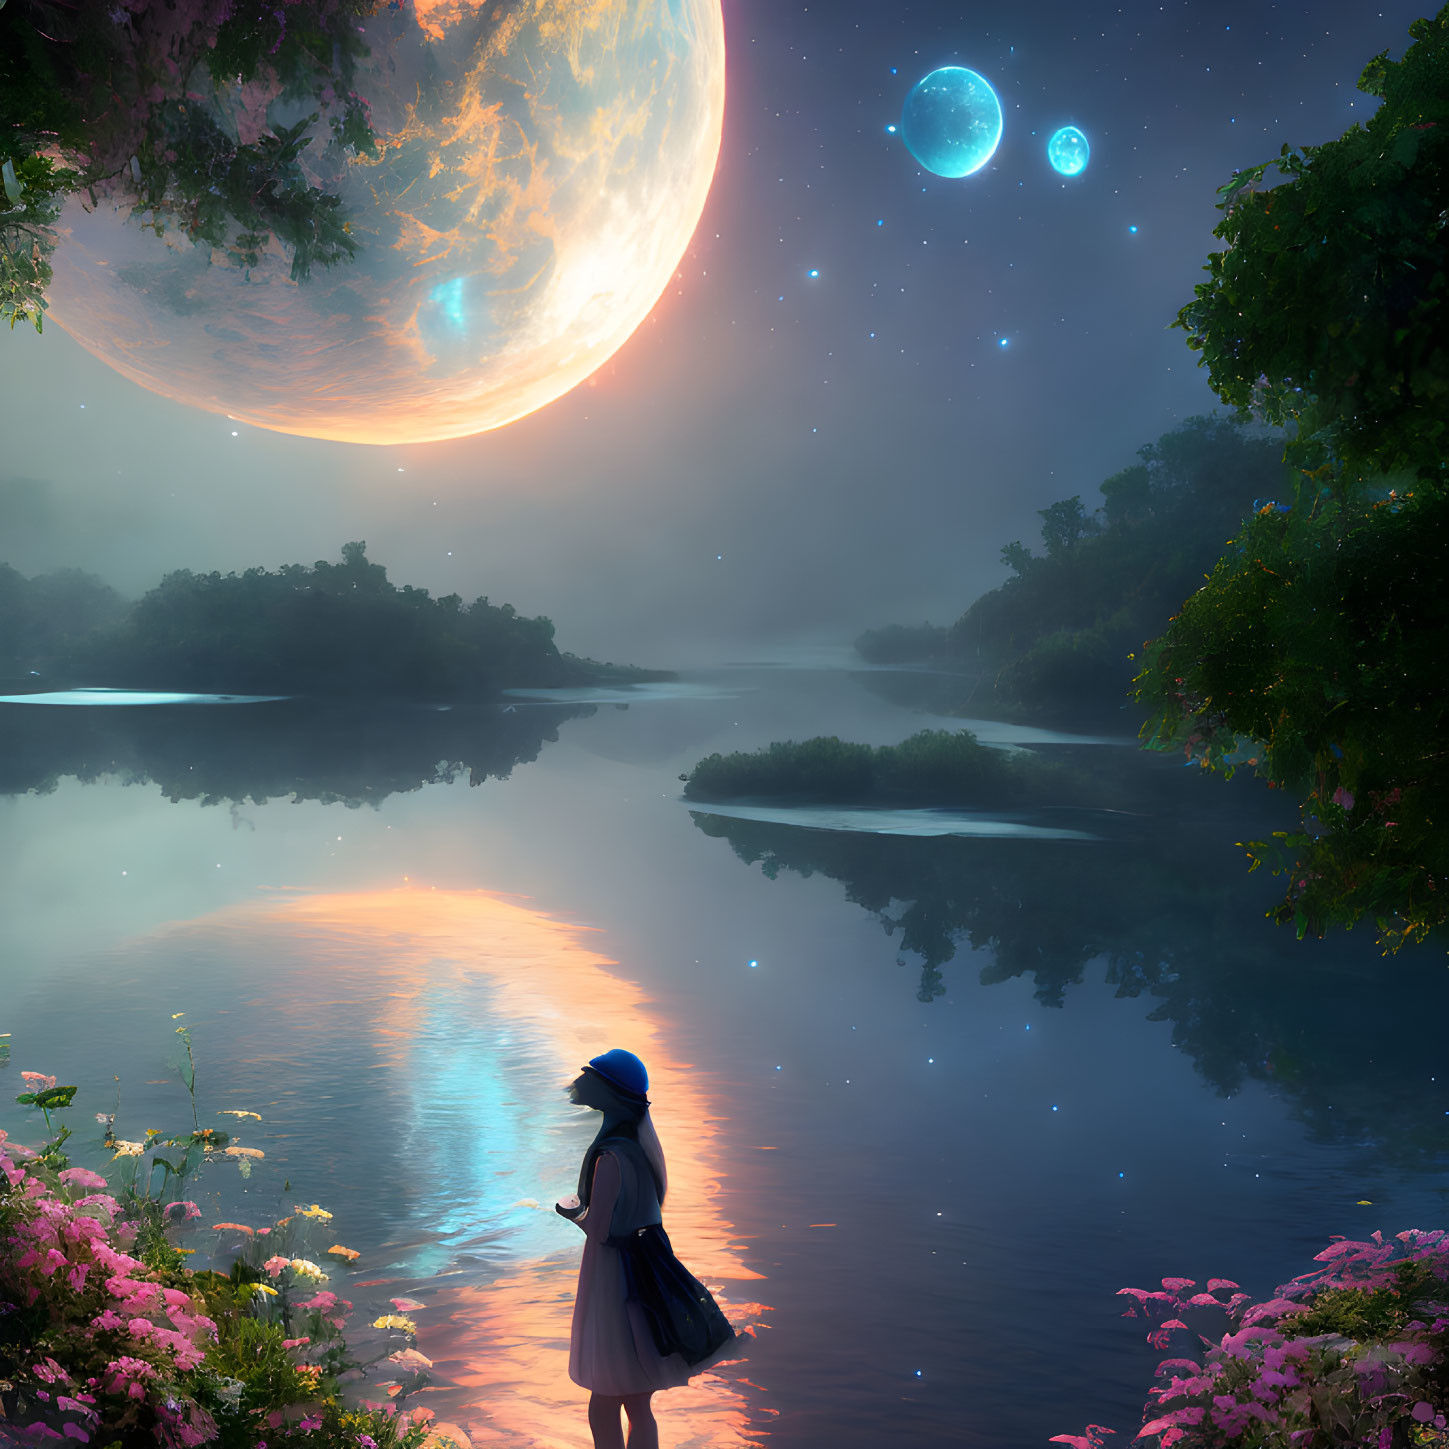 Person admires fantastical planet and two moons over calm lake at twilight